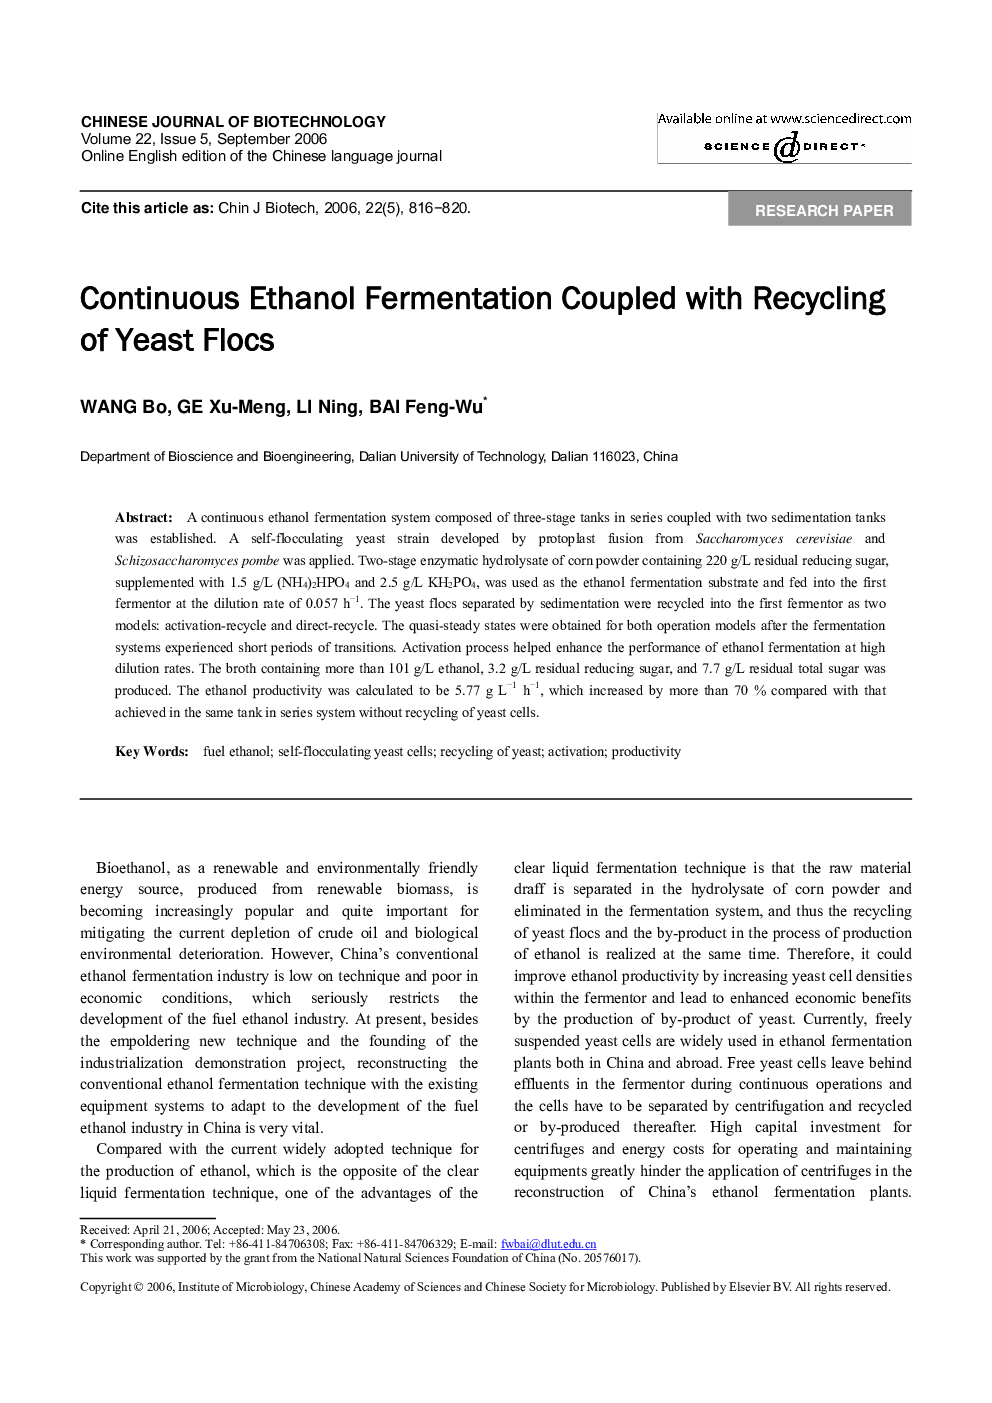 Continuous Ethanol Fermentation Coupled with Recycling of Yeast Flocs